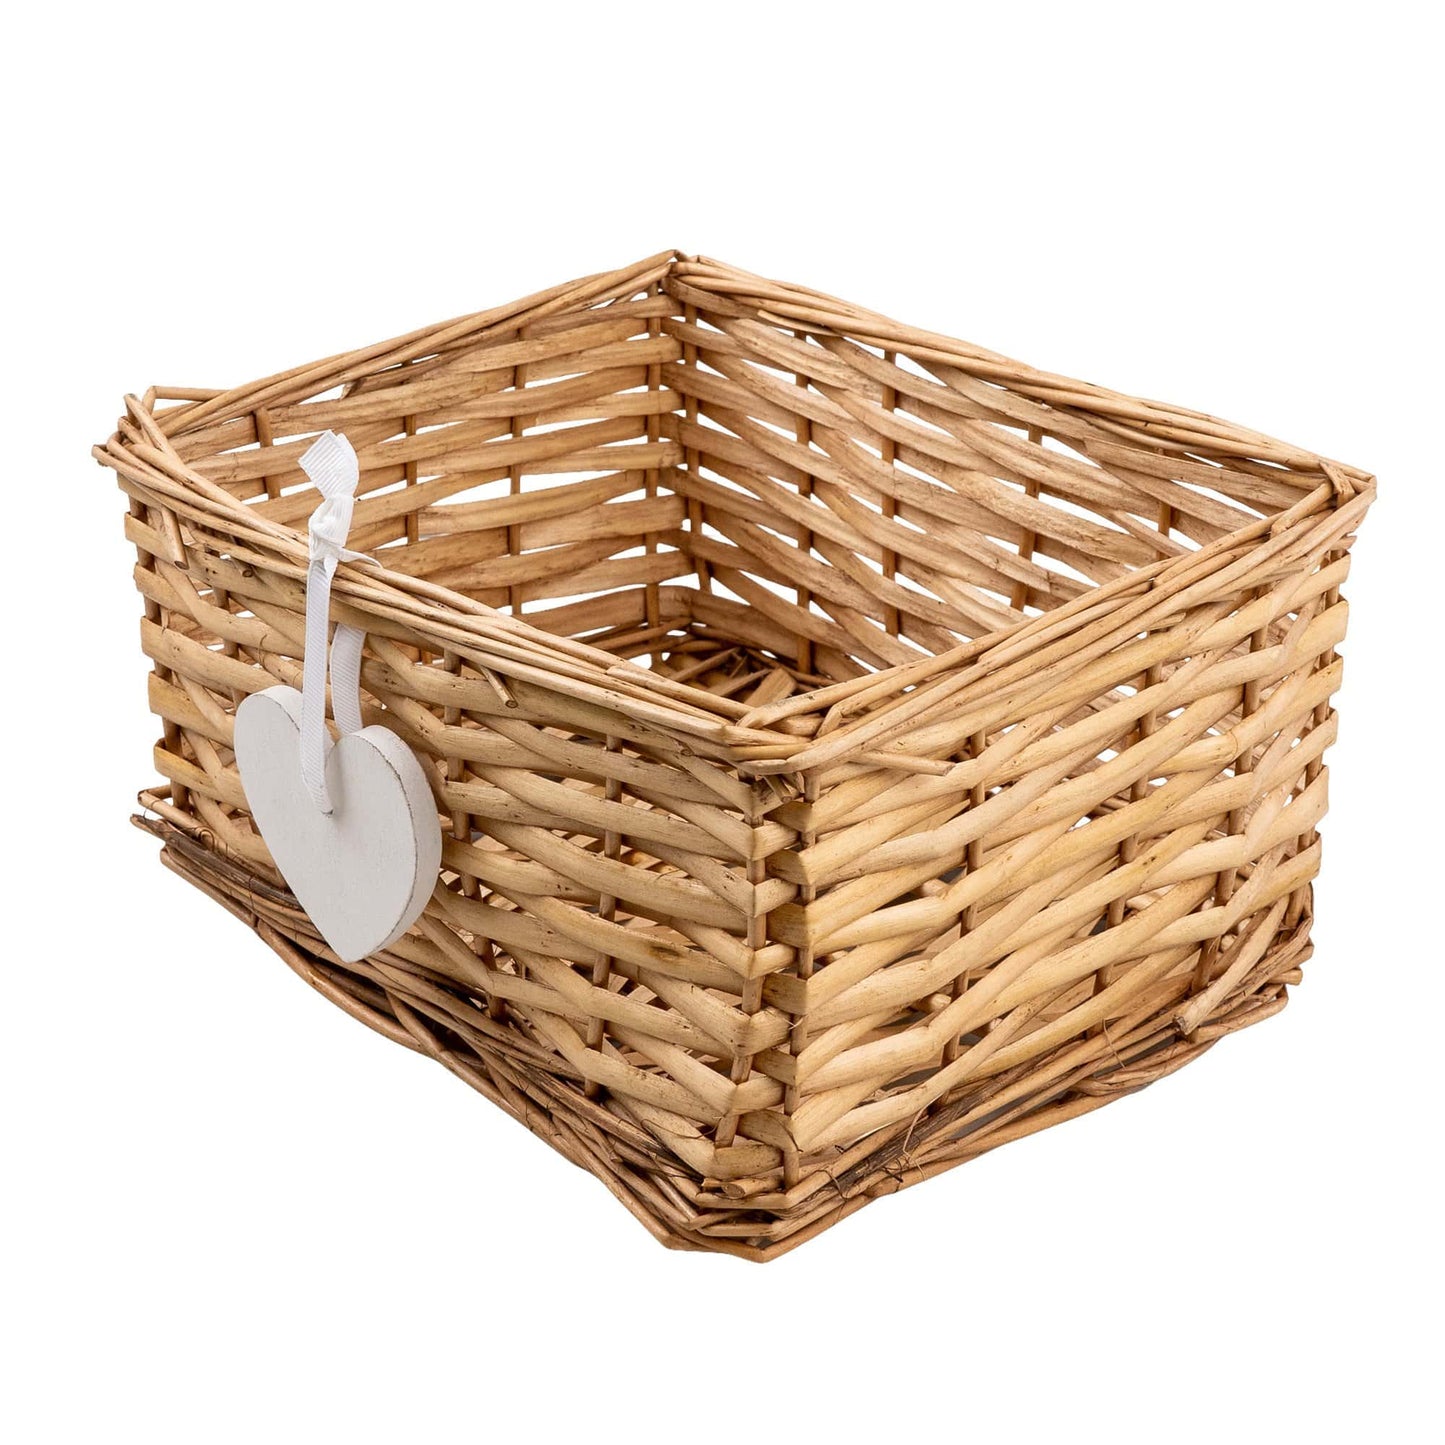 Brown Wicker Basket with White Hanging Heart